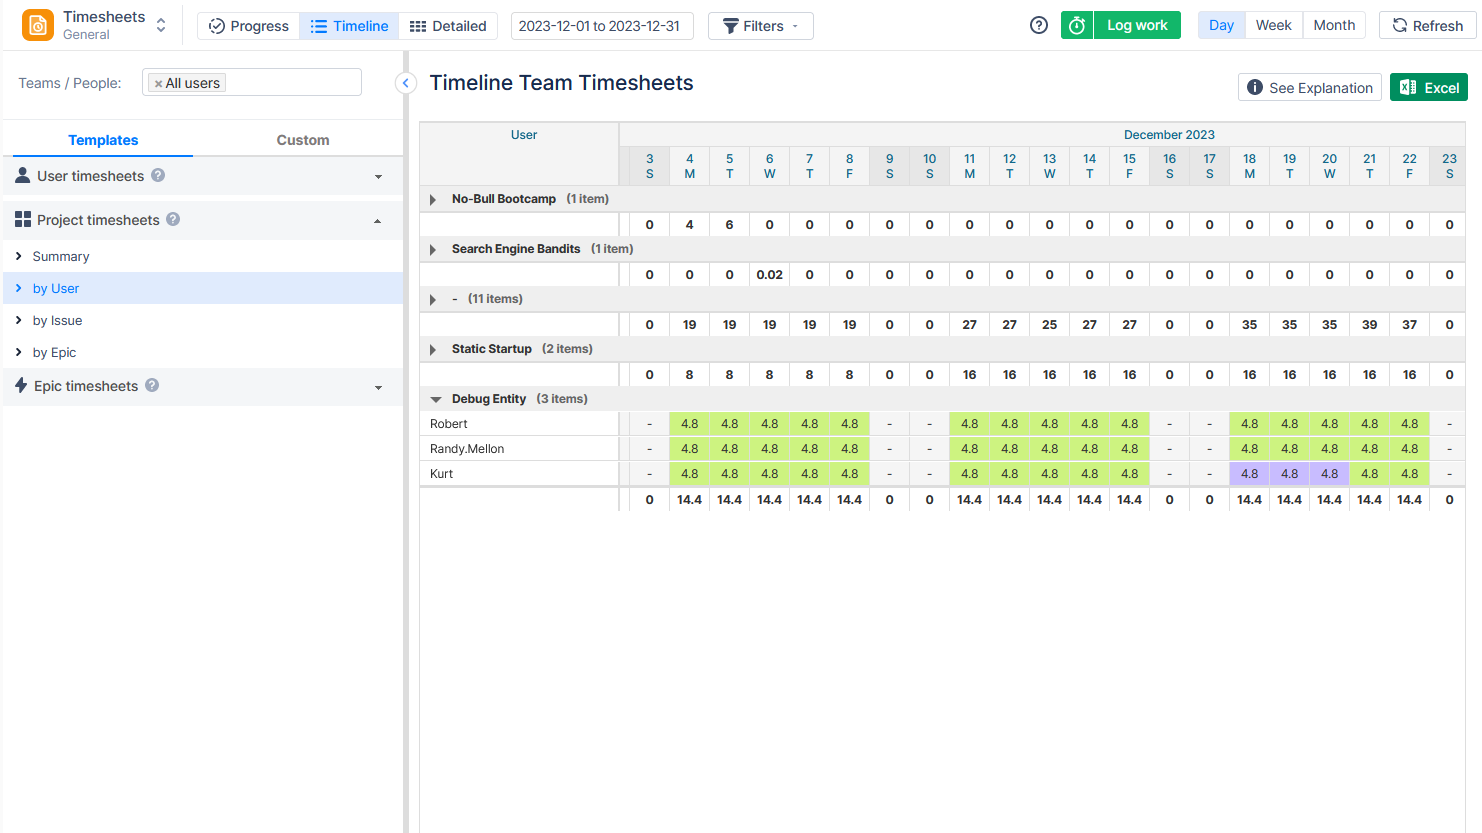 Project Timesheets in ActivityTimeline